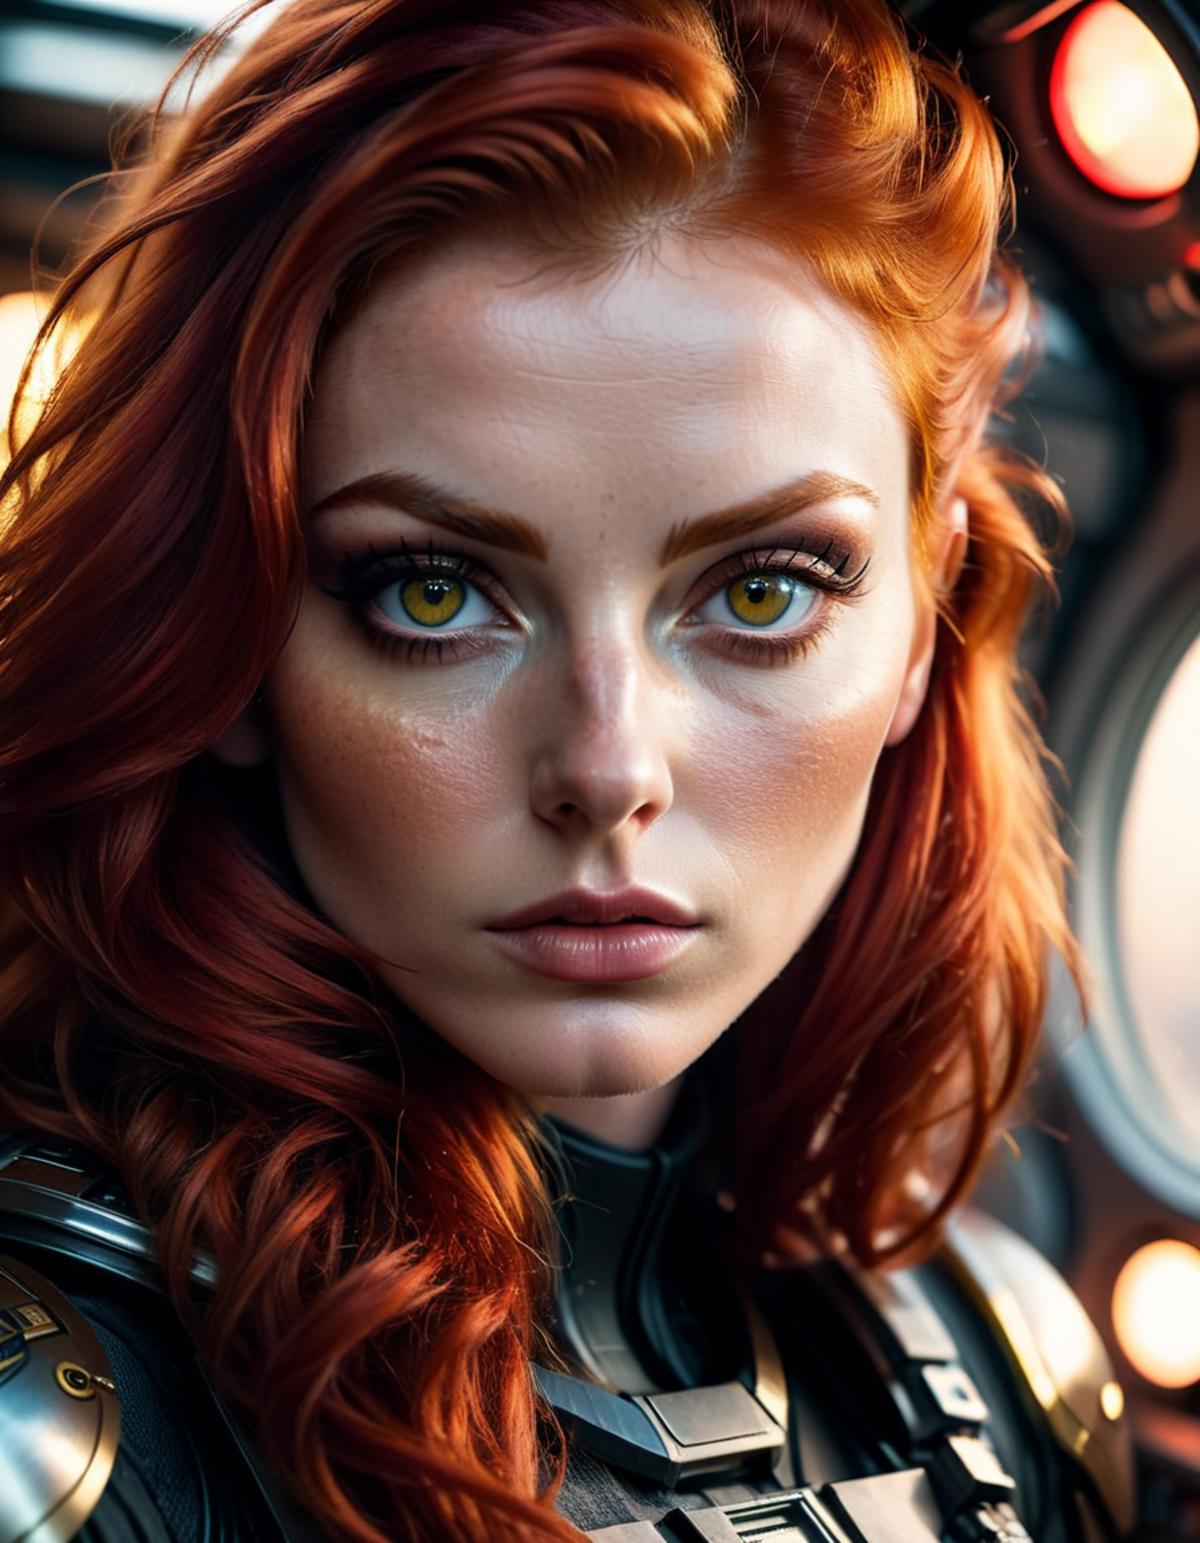 A close up of a red headed woman with yellow eyes.